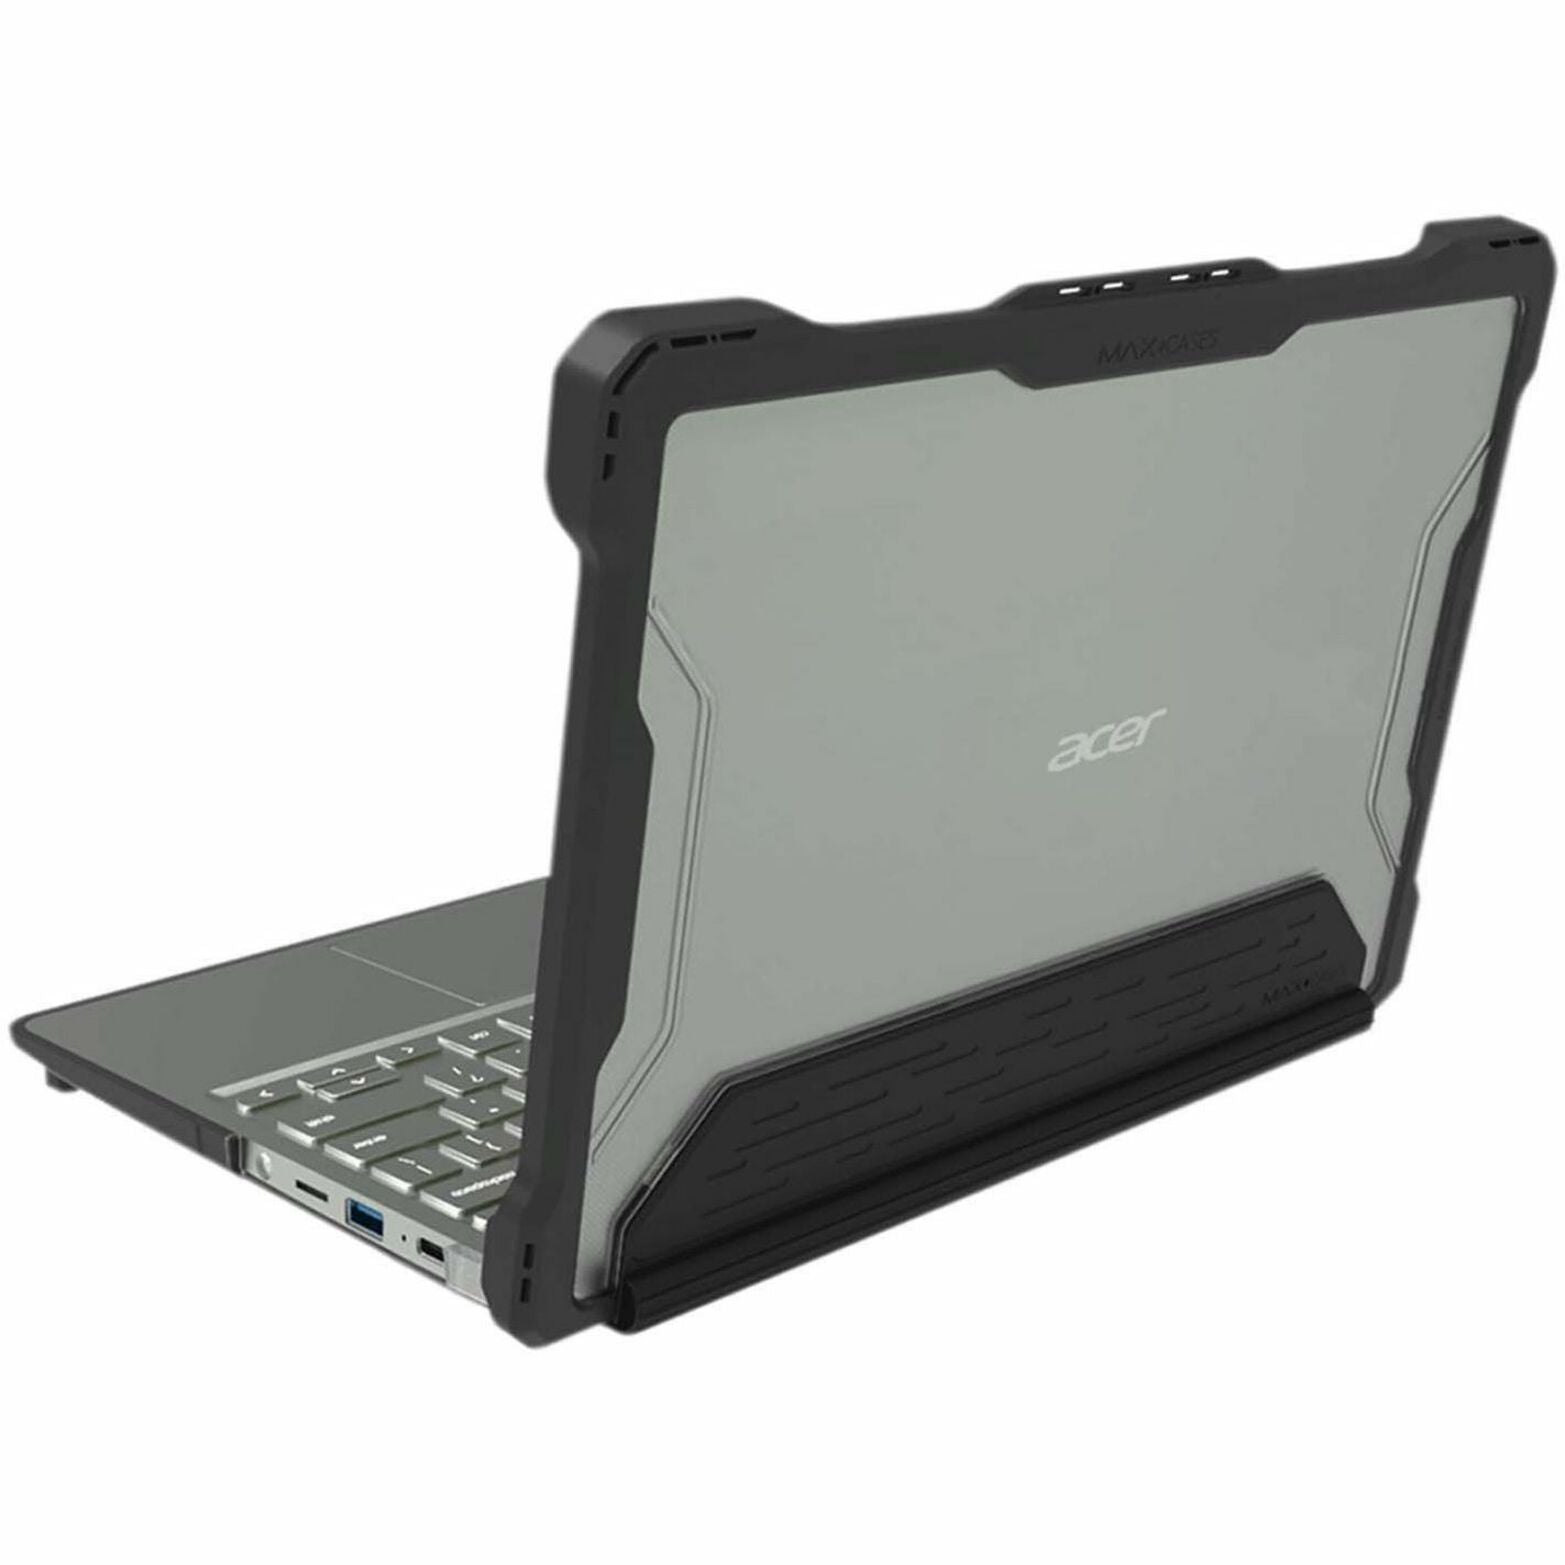 MAXCases Extreme Shell-S for Acer C734 Chromebook 11" (Black) (AC-ESS-C734-BLK)